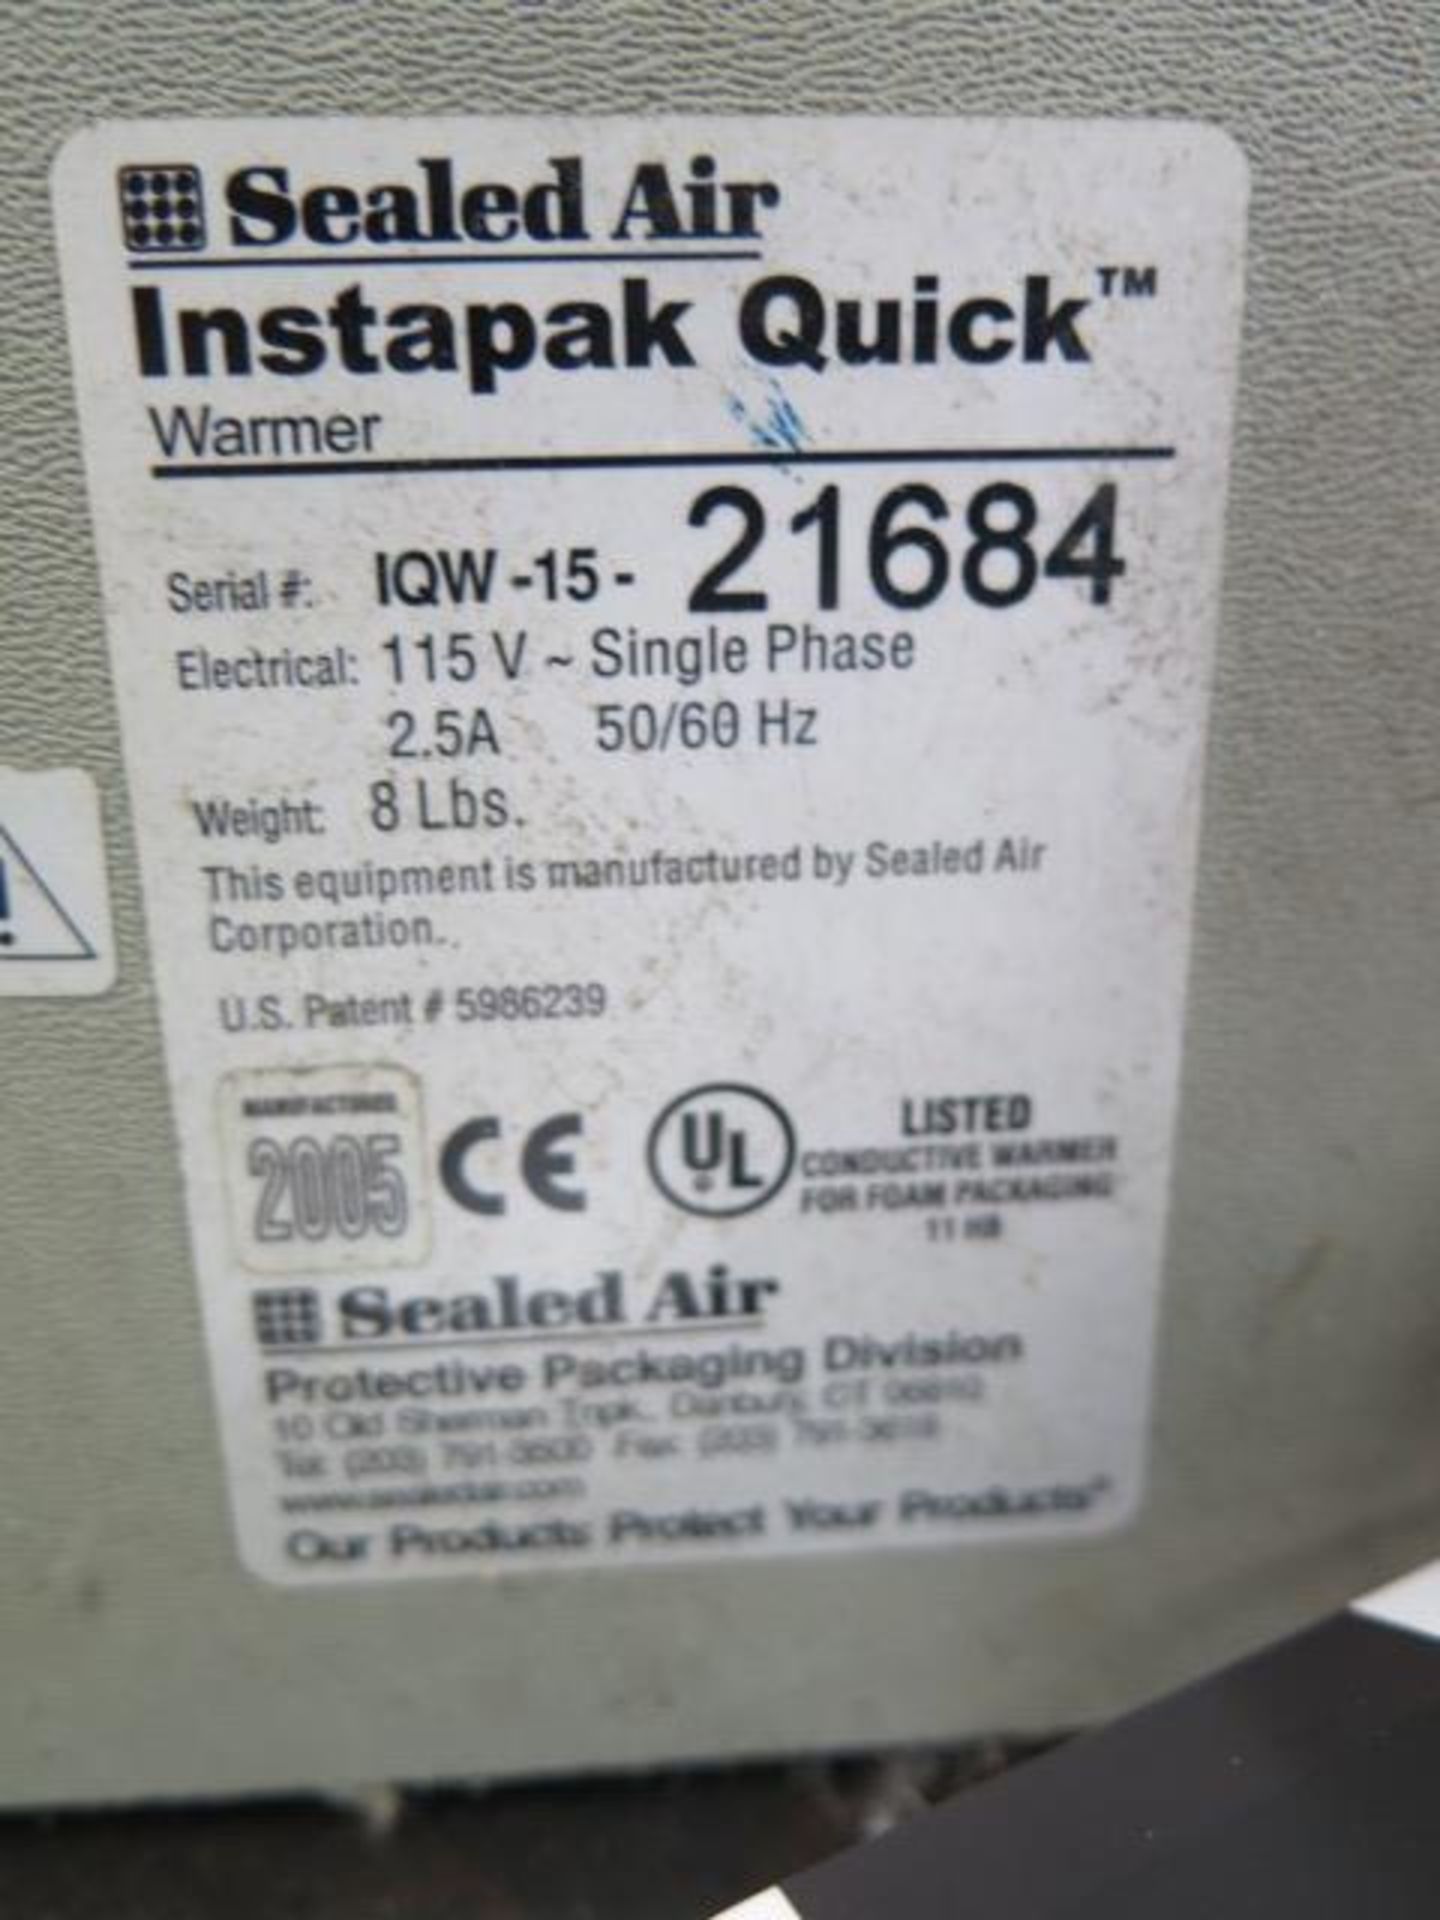 Sealed Air "Instapak Quick" Foam Packaging System (SOLD AS-IS - NO WARRANTY) - Image 9 of 9